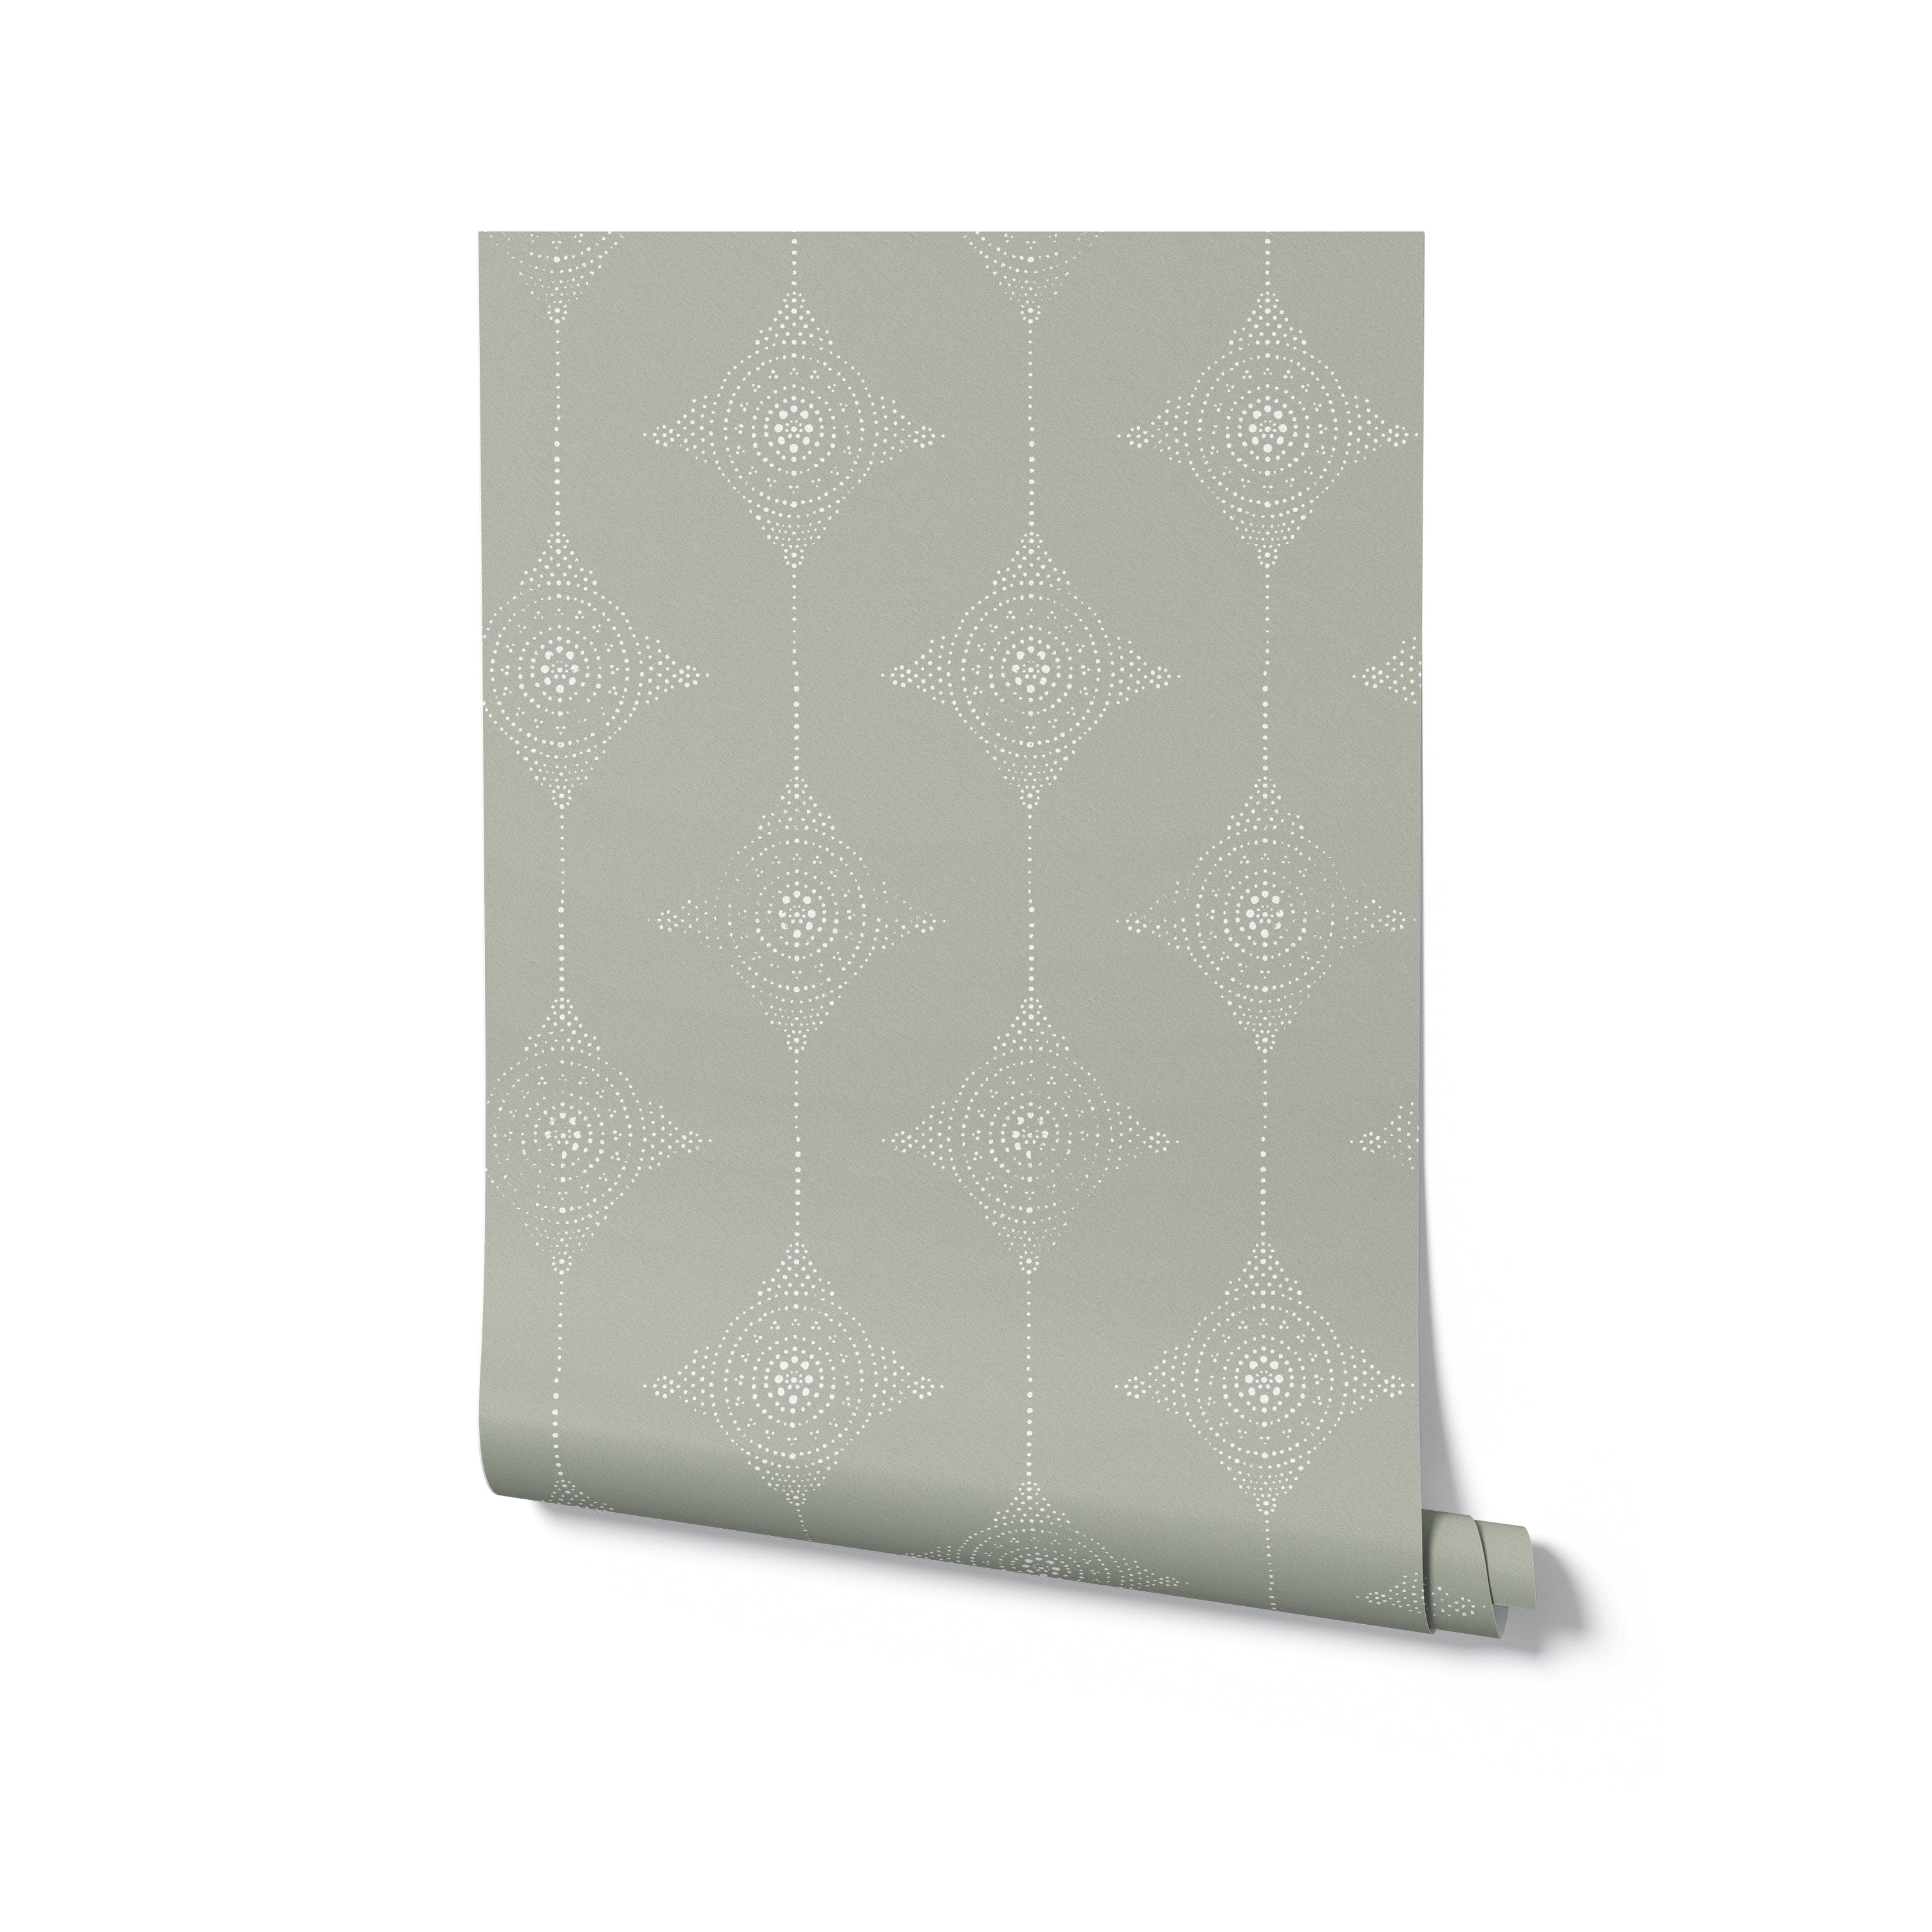 A rolled-up section of the Serenity Circles Wallpaper, displaying the continuous pattern of white circular designs arranged in diamond shapes on an olive green background. The image illustrates the wallpaper's refined and harmonious aesthetic.